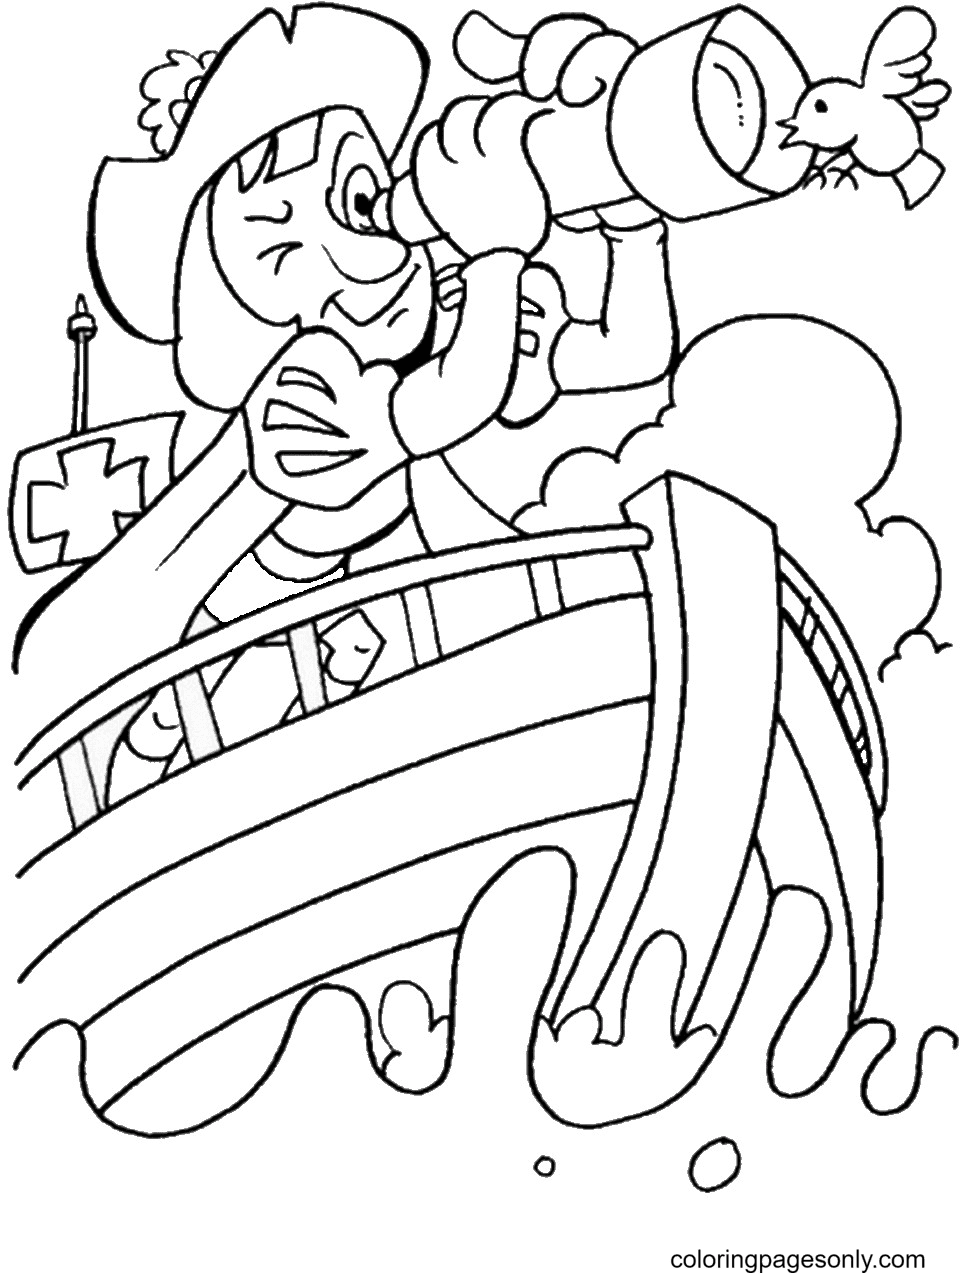 October Christopher Columbus Coloring Page